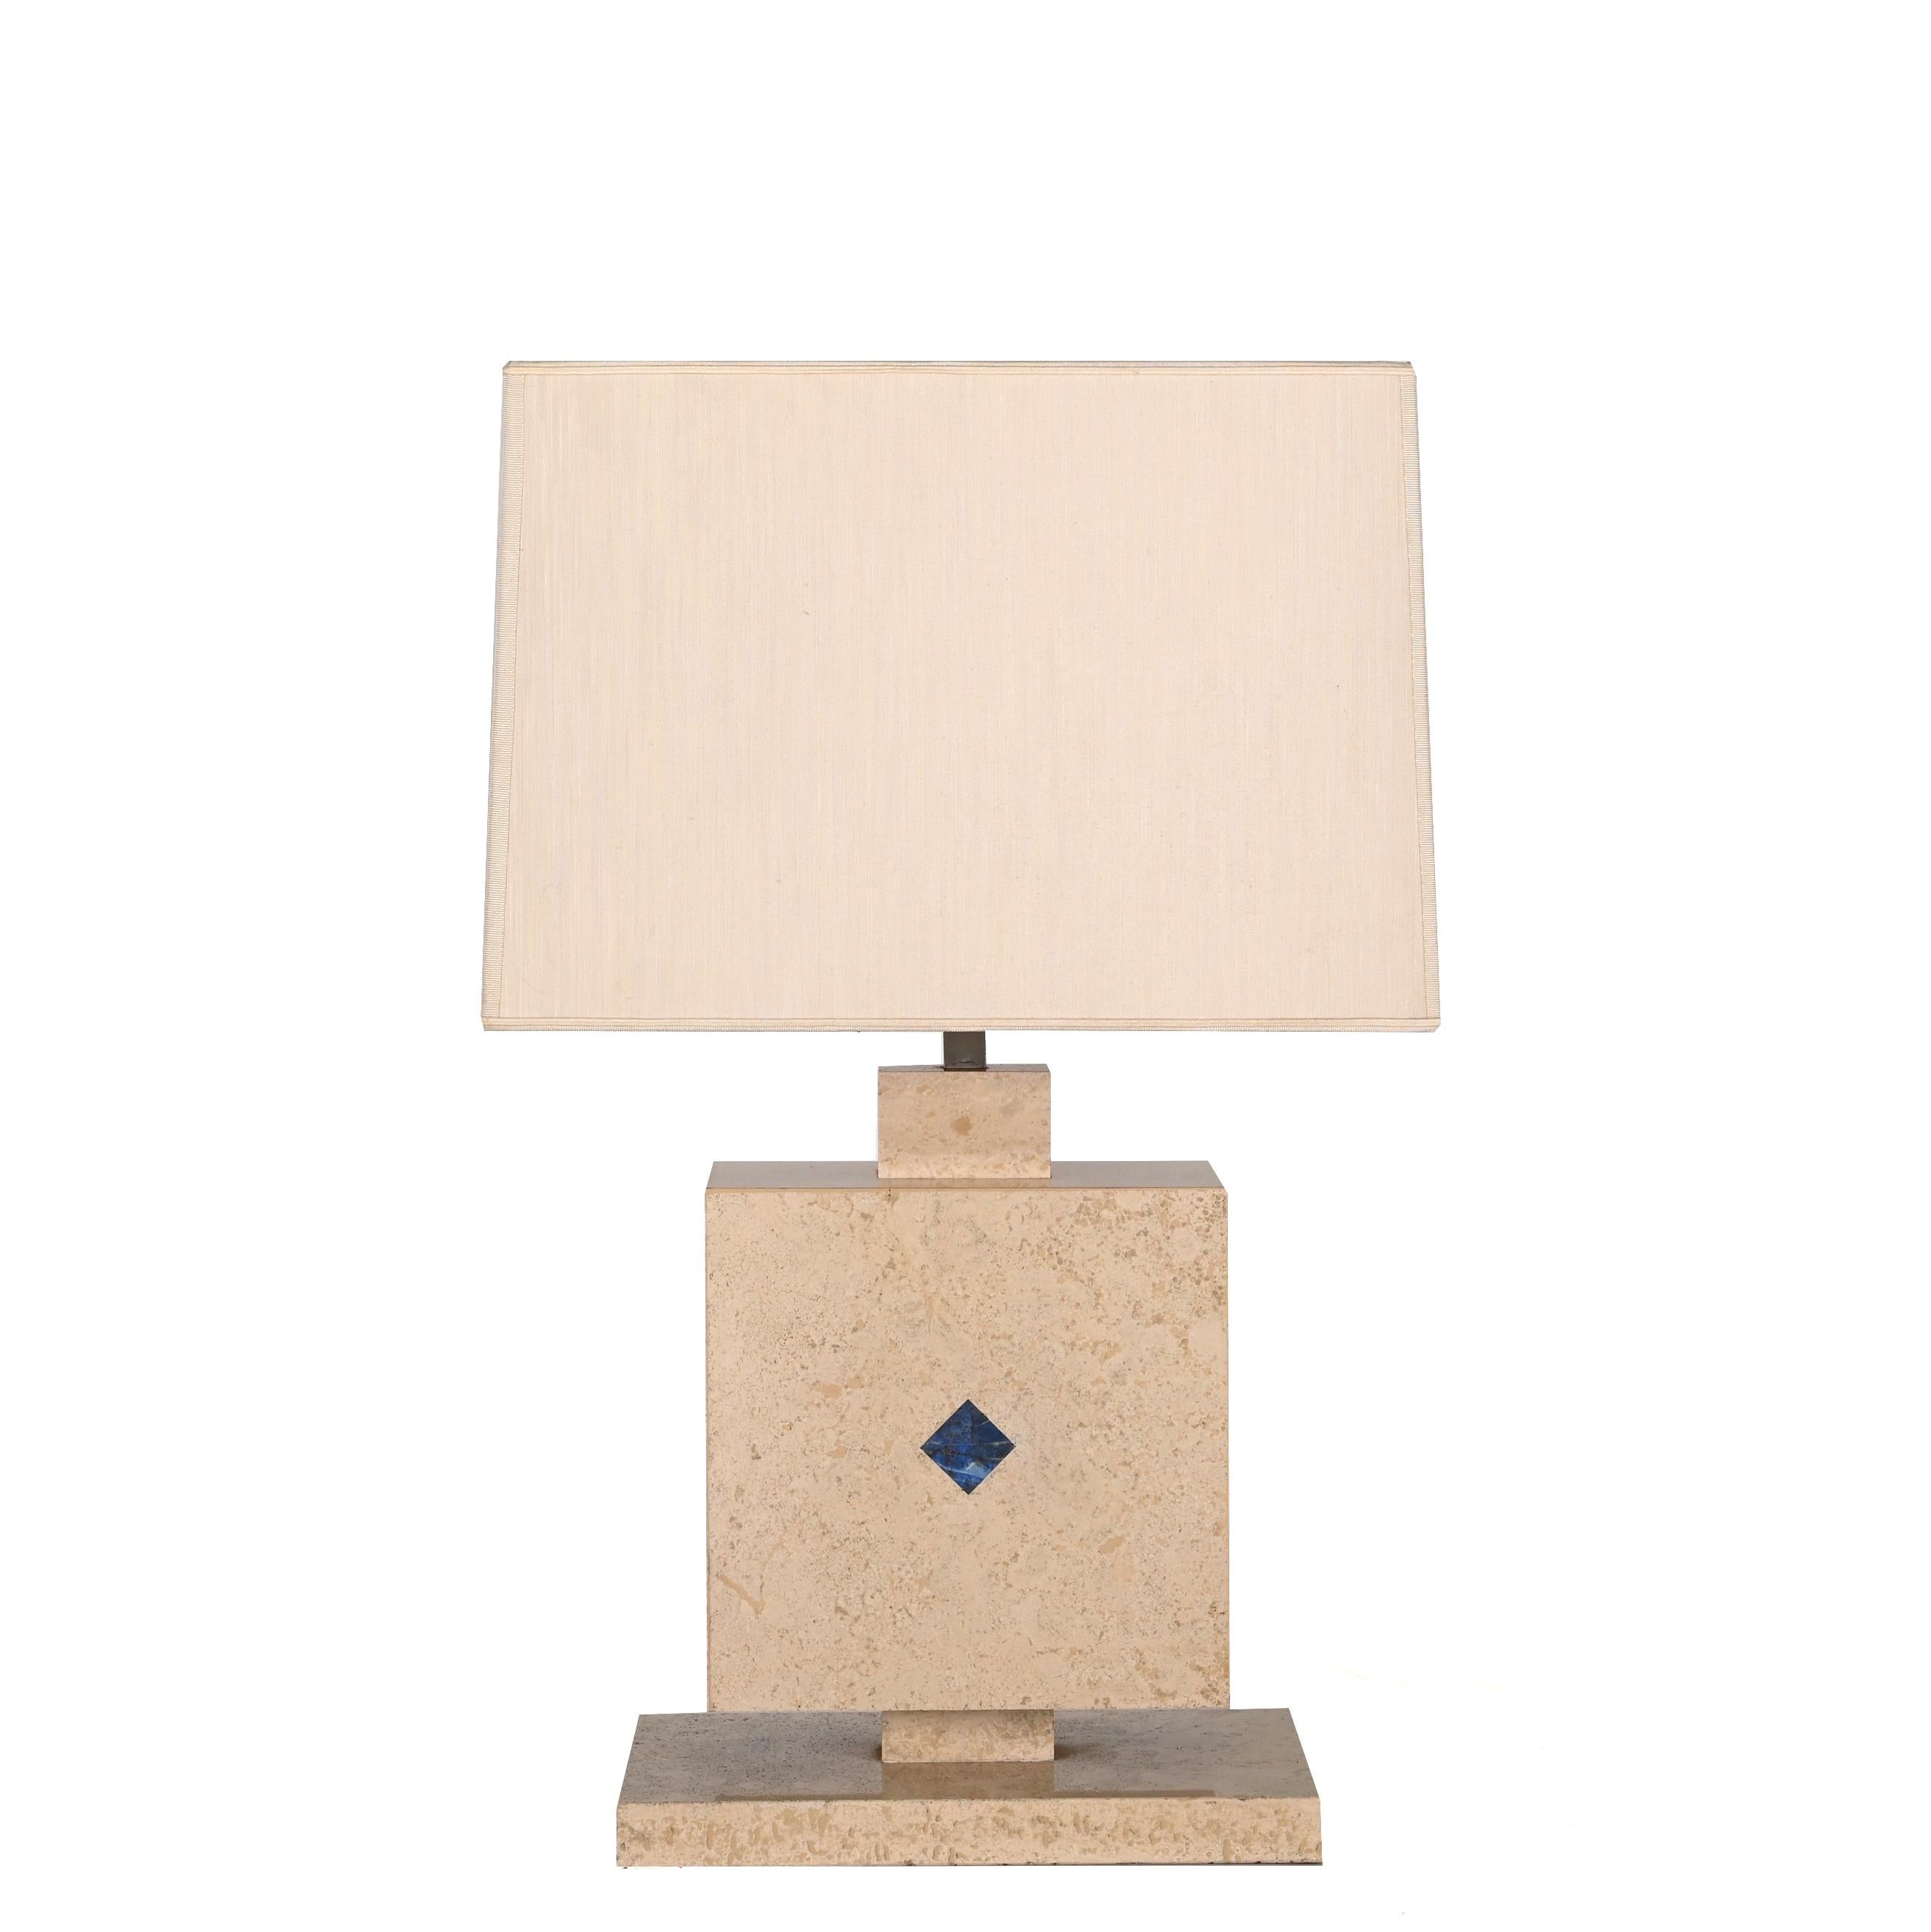 Amazing midcentury travertine marble with lapis lazuli stone table lamp. This fantastic item was designed in Italy during the 1970s. 

The fusion of materials and shapes is breathtaking: a rhombus lapis lazuli stone is embedded into a square